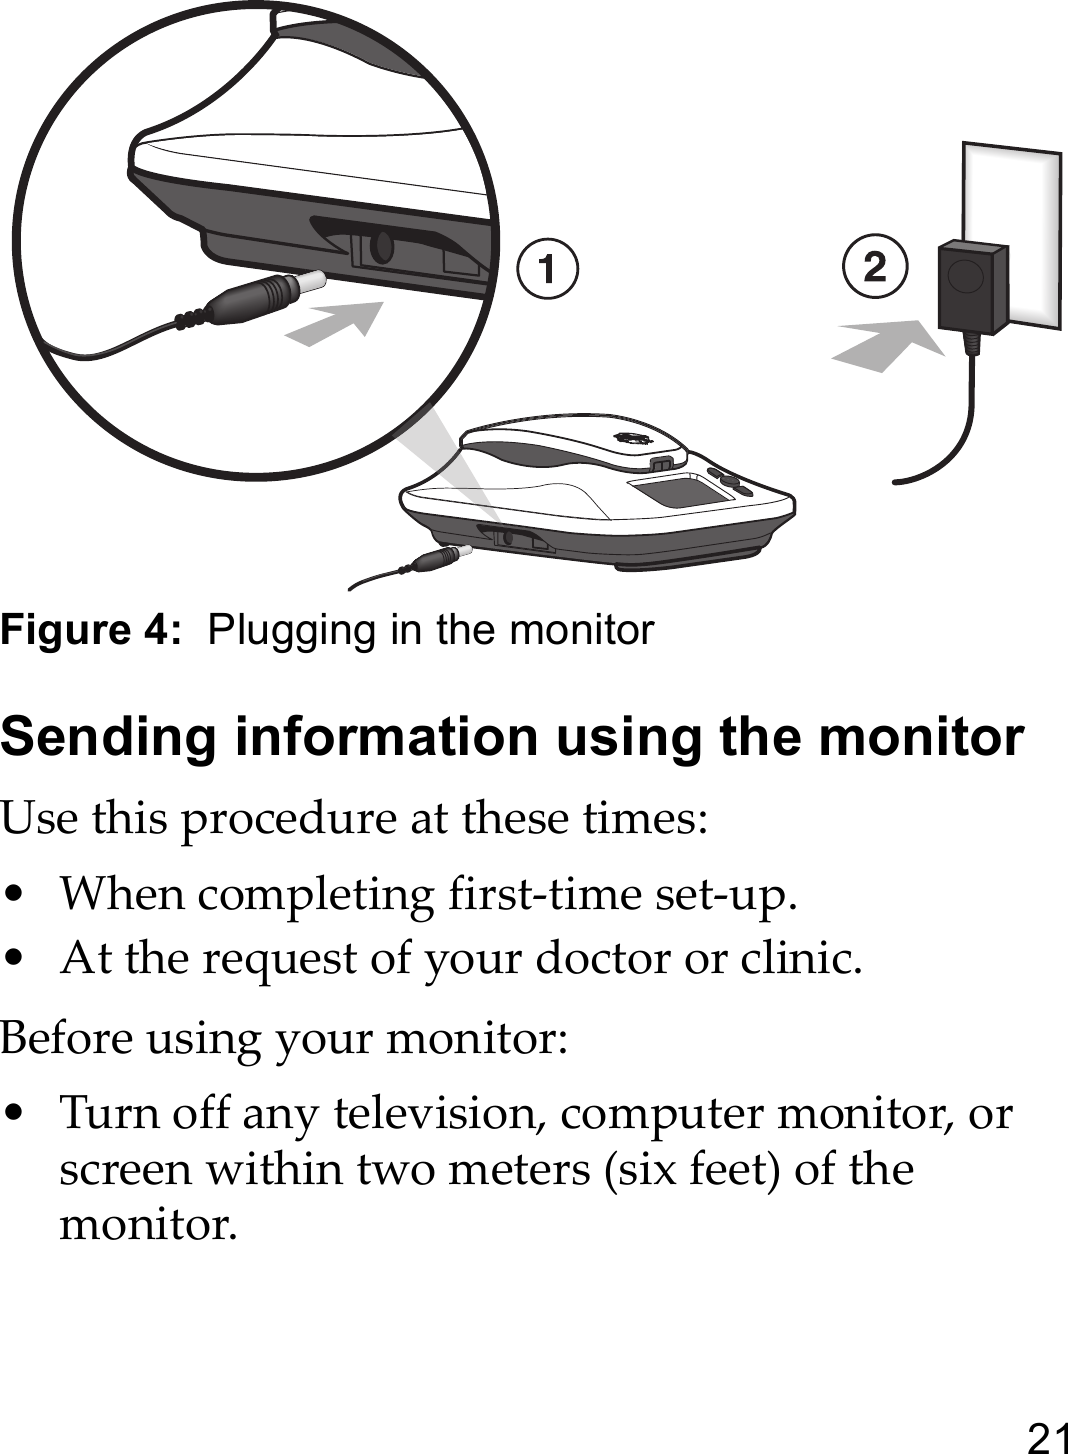 21Figure 4:  Plugging in the monitorSending information using the monitorUse this procedure at these times:• When completing first-time set-up.• At the request of your doctor or clinic.Before using your monitor:• Turn off any television, computer monitor, or screen within two meters (six feet) of the monitor.